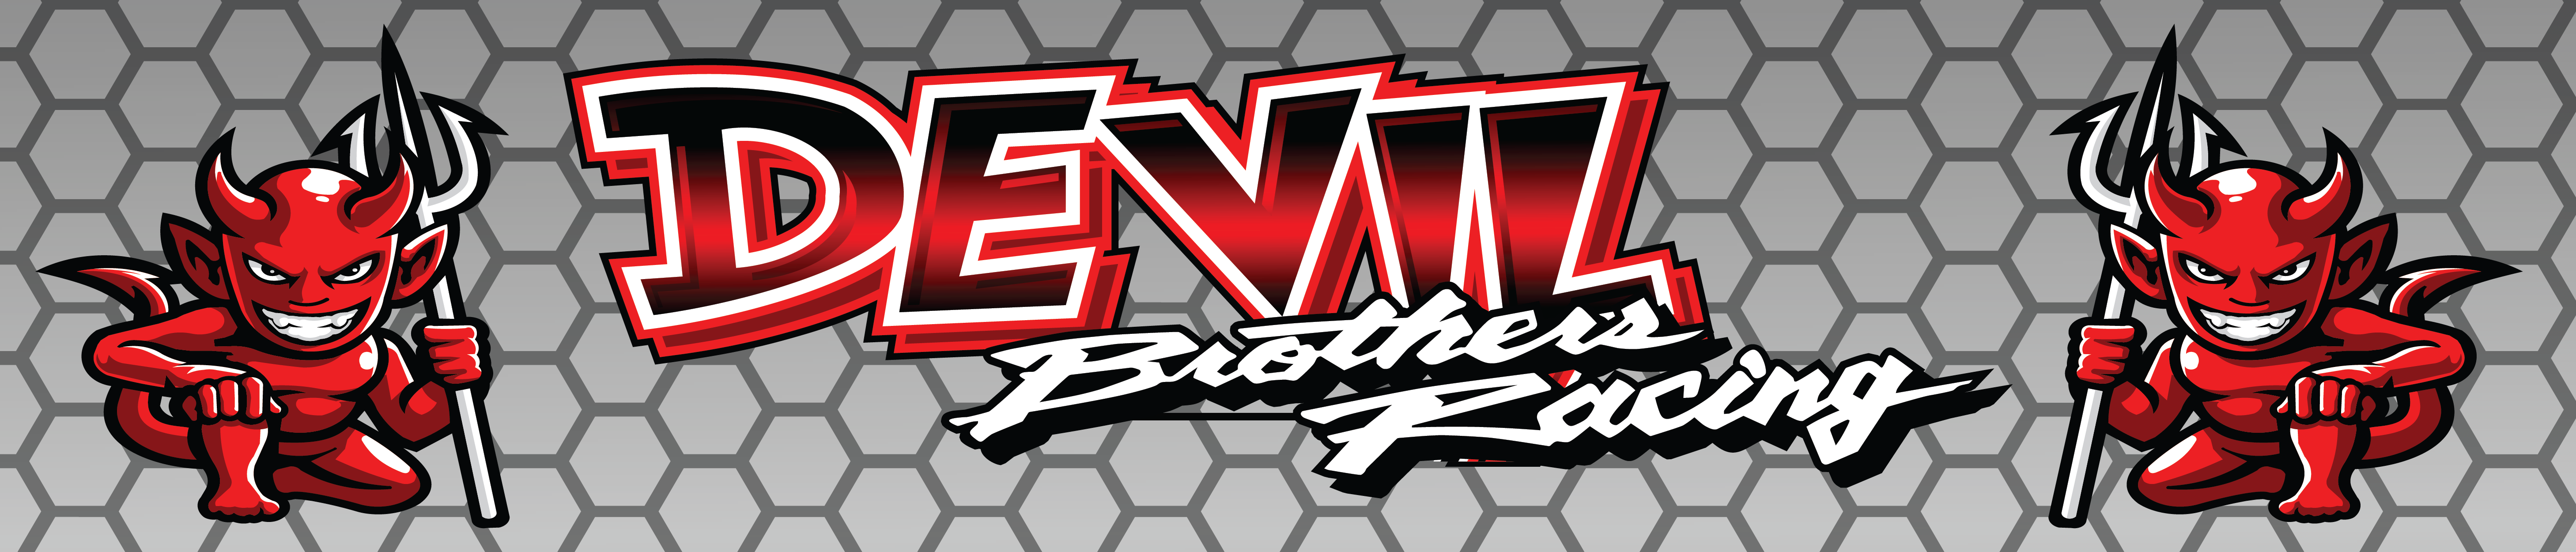 Devil Brothers Racing